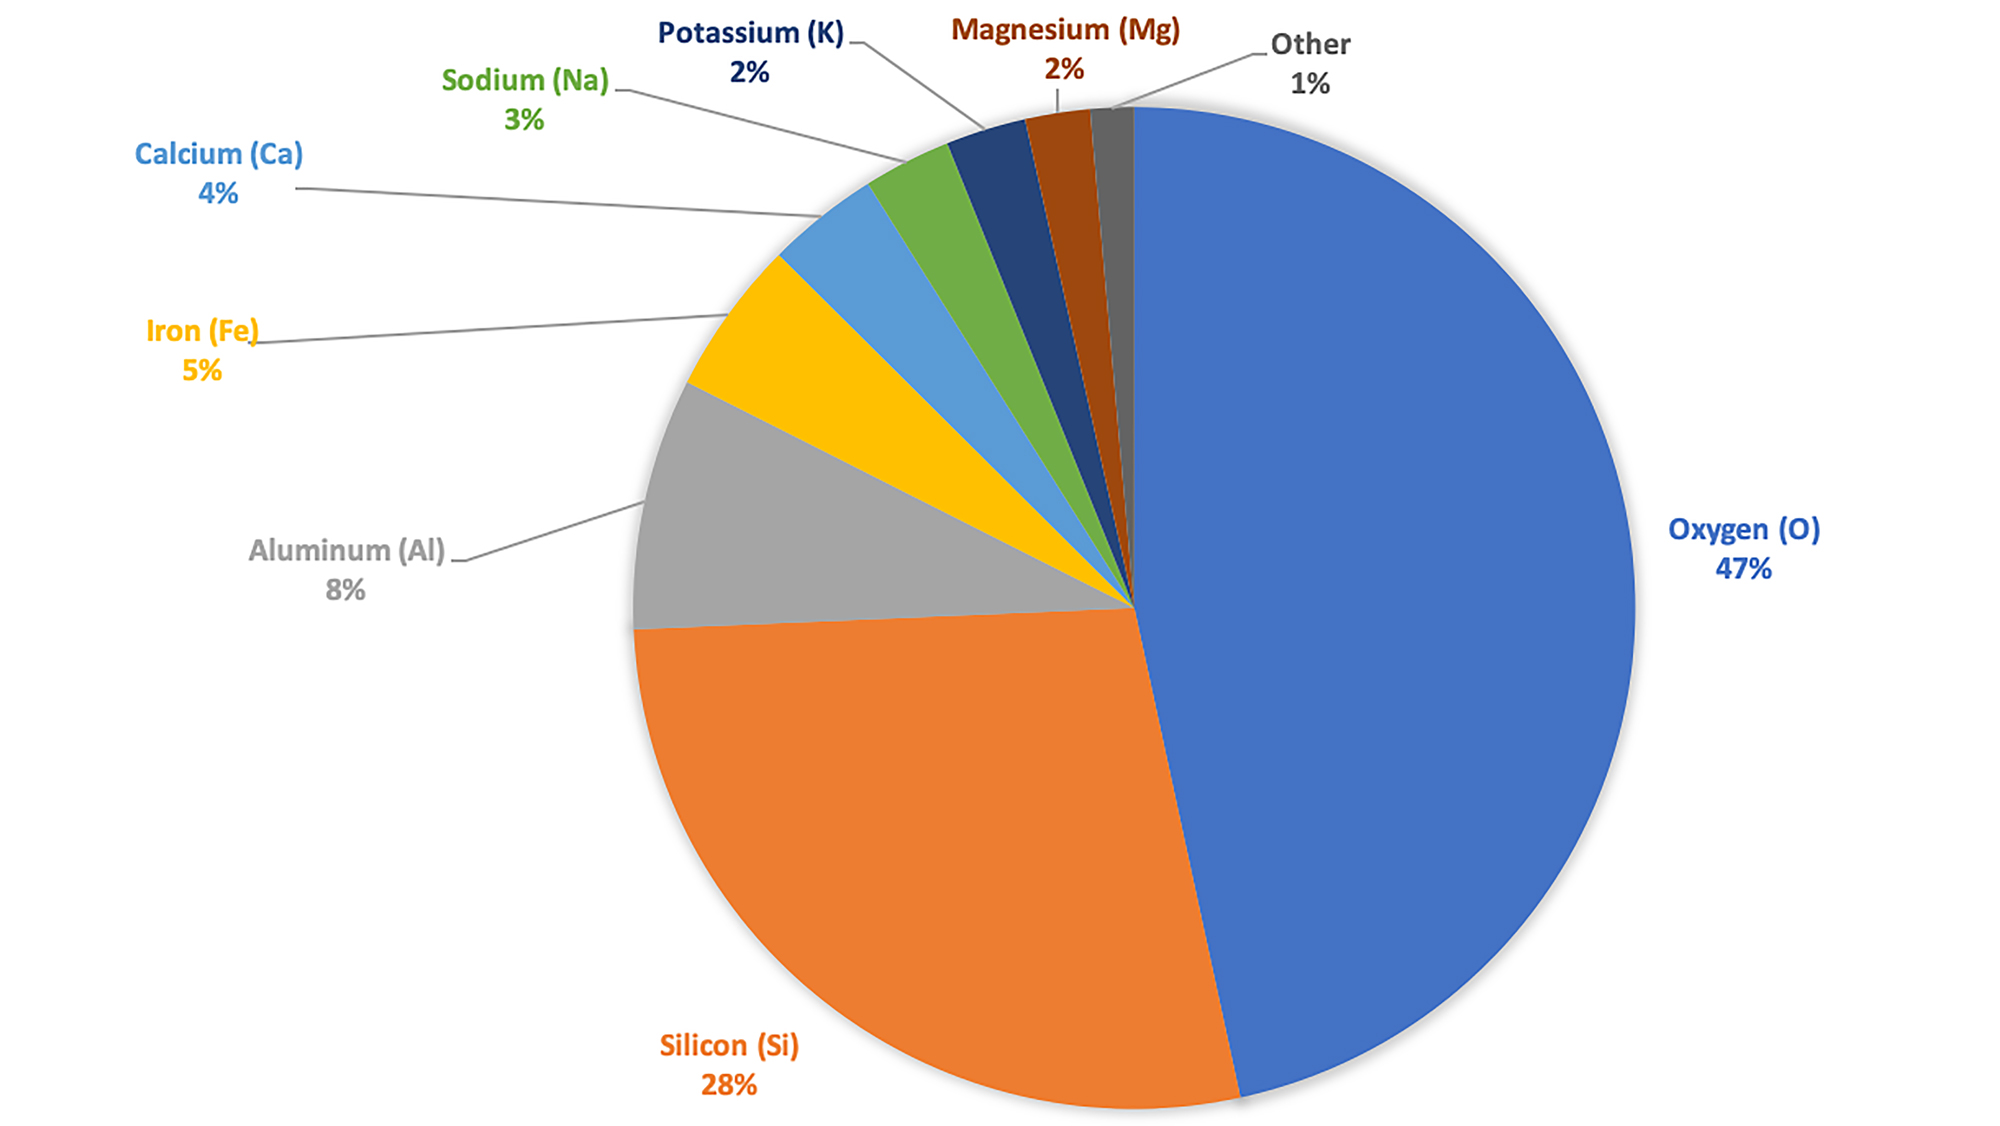 Pie chart showing the weight percentages of different minerals in Earth's crust.